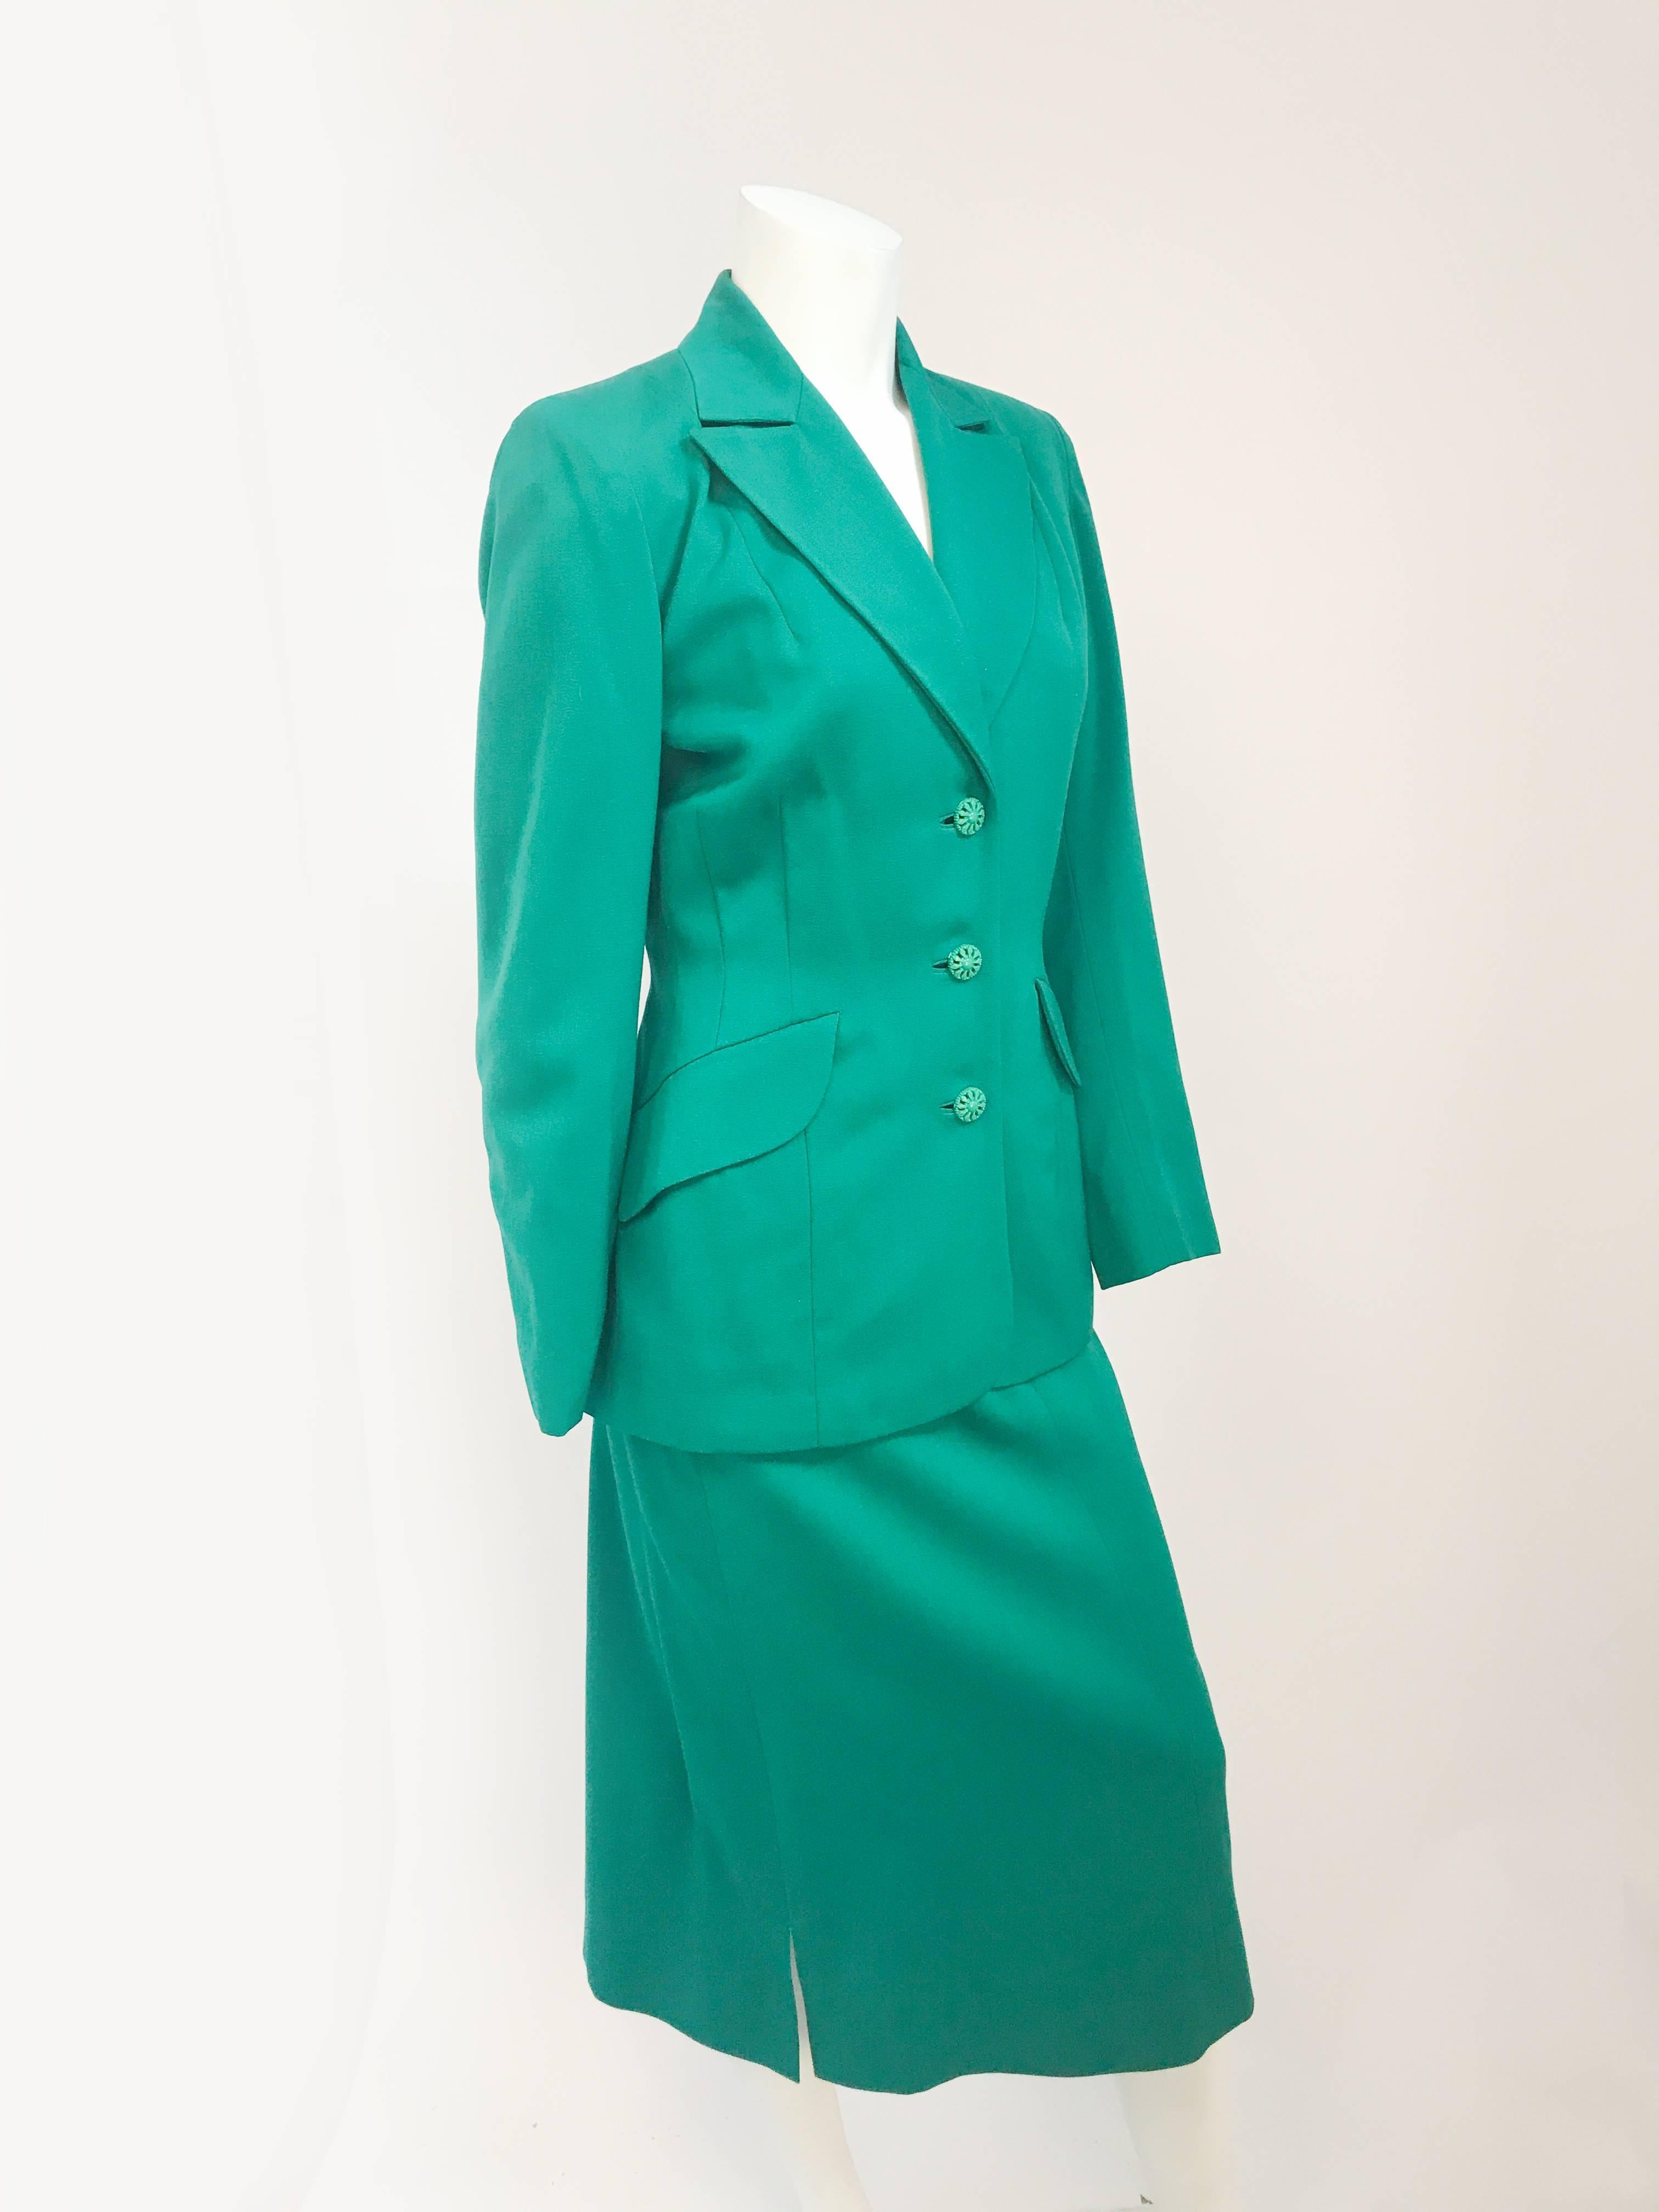 1940s Kelly Green Suit Set. Kelly green suit set with wide lapel, padded shoulders, and button/zipper closures. 